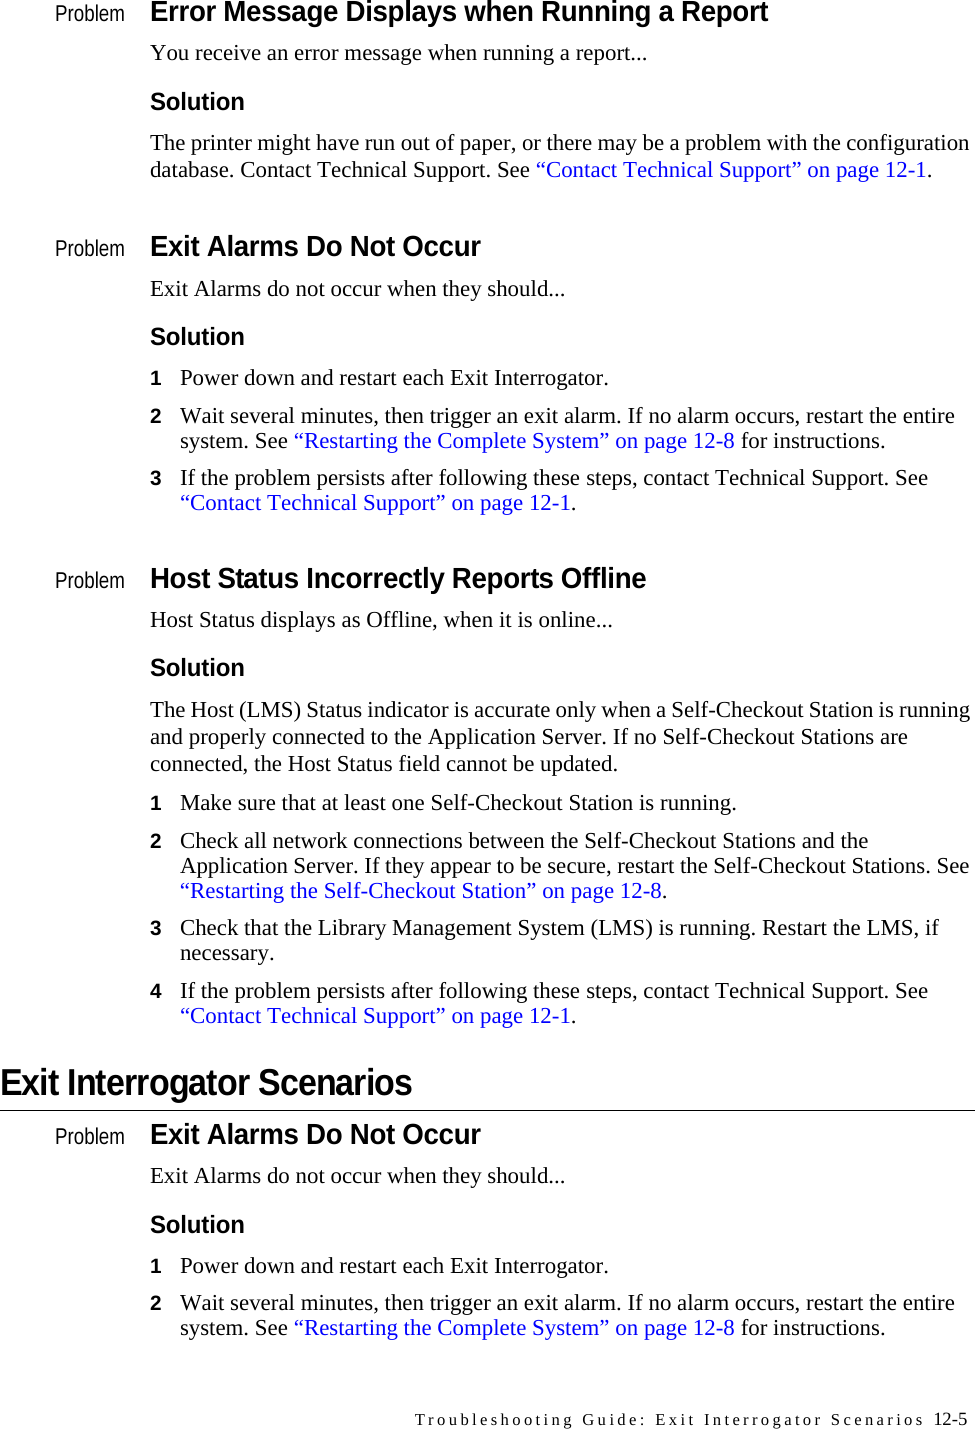 Troubleshooting Guide: Exit Interrogator Scenarios 12-5ProblemError Message Displays when Running a ReportYou receive an error message when running a report...SolutionThe printer might have run out of paper, or there may be a problem with the configuration database. Contact Technical Support. See “Contact Technical Support” on page 12-1.ProblemExit Alarms Do Not OccurExit Alarms do not occur when they should...Solution1Power down and restart each Exit Interrogator. 2Wait several minutes, then trigger an exit alarm. If no alarm occurs, restart the entire system. See “Restarting the Complete System” on page 12-8 for instructions.3If the problem persists after following these steps, contact Technical Support. See “Contact Technical Support” on page 12-1.ProblemHost Status Incorrectly Reports OfflineHost Status displays as Offline, when it is online...SolutionThe Host (LMS) Status indicator is accurate only when a Self-Checkout Station is running and properly connected to the Application Server. If no Self-Checkout Stations are connected, the Host Status field cannot be updated.1Make sure that at least one Self-Checkout Station is running. 2Check all network connections between the Self-Checkout Stations and the Application Server. If they appear to be secure, restart the Self-Checkout Stations. See “Restarting the Self-Checkout Station” on page 12-8.3Check that the Library Management System (LMS) is running. Restart the LMS, if necessary.4If the problem persists after following these steps, contact Technical Support. See “Contact Technical Support” on page 12-1.Exit Interrogator ScenariosProblemExit Alarms Do Not OccurExit Alarms do not occur when they should...Solution1Power down and restart each Exit Interrogator. 2Wait several minutes, then trigger an exit alarm. If no alarm occurs, restart the entire system. See “Restarting the Complete System” on page 12-8 for instructions.